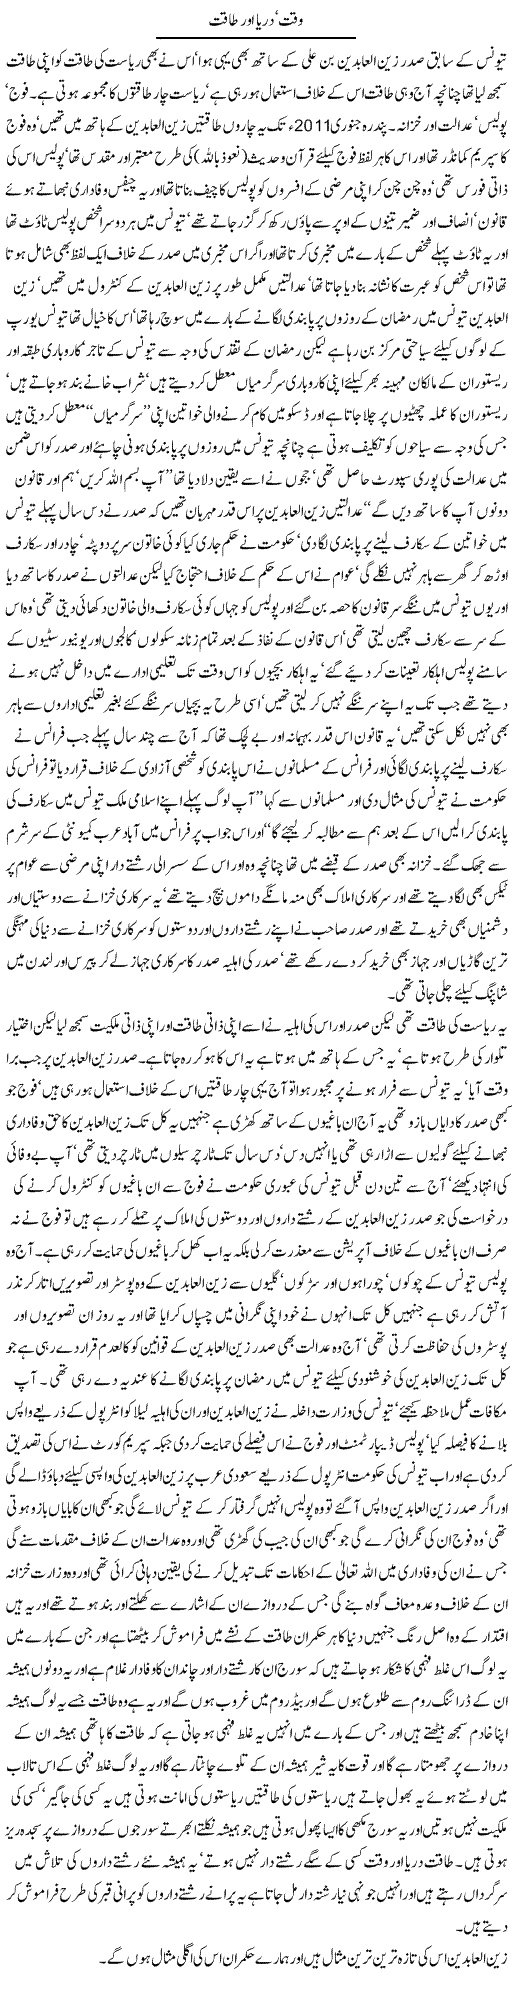 Tunisia and Army Express Column Javed Chaudhry 28 January 2011